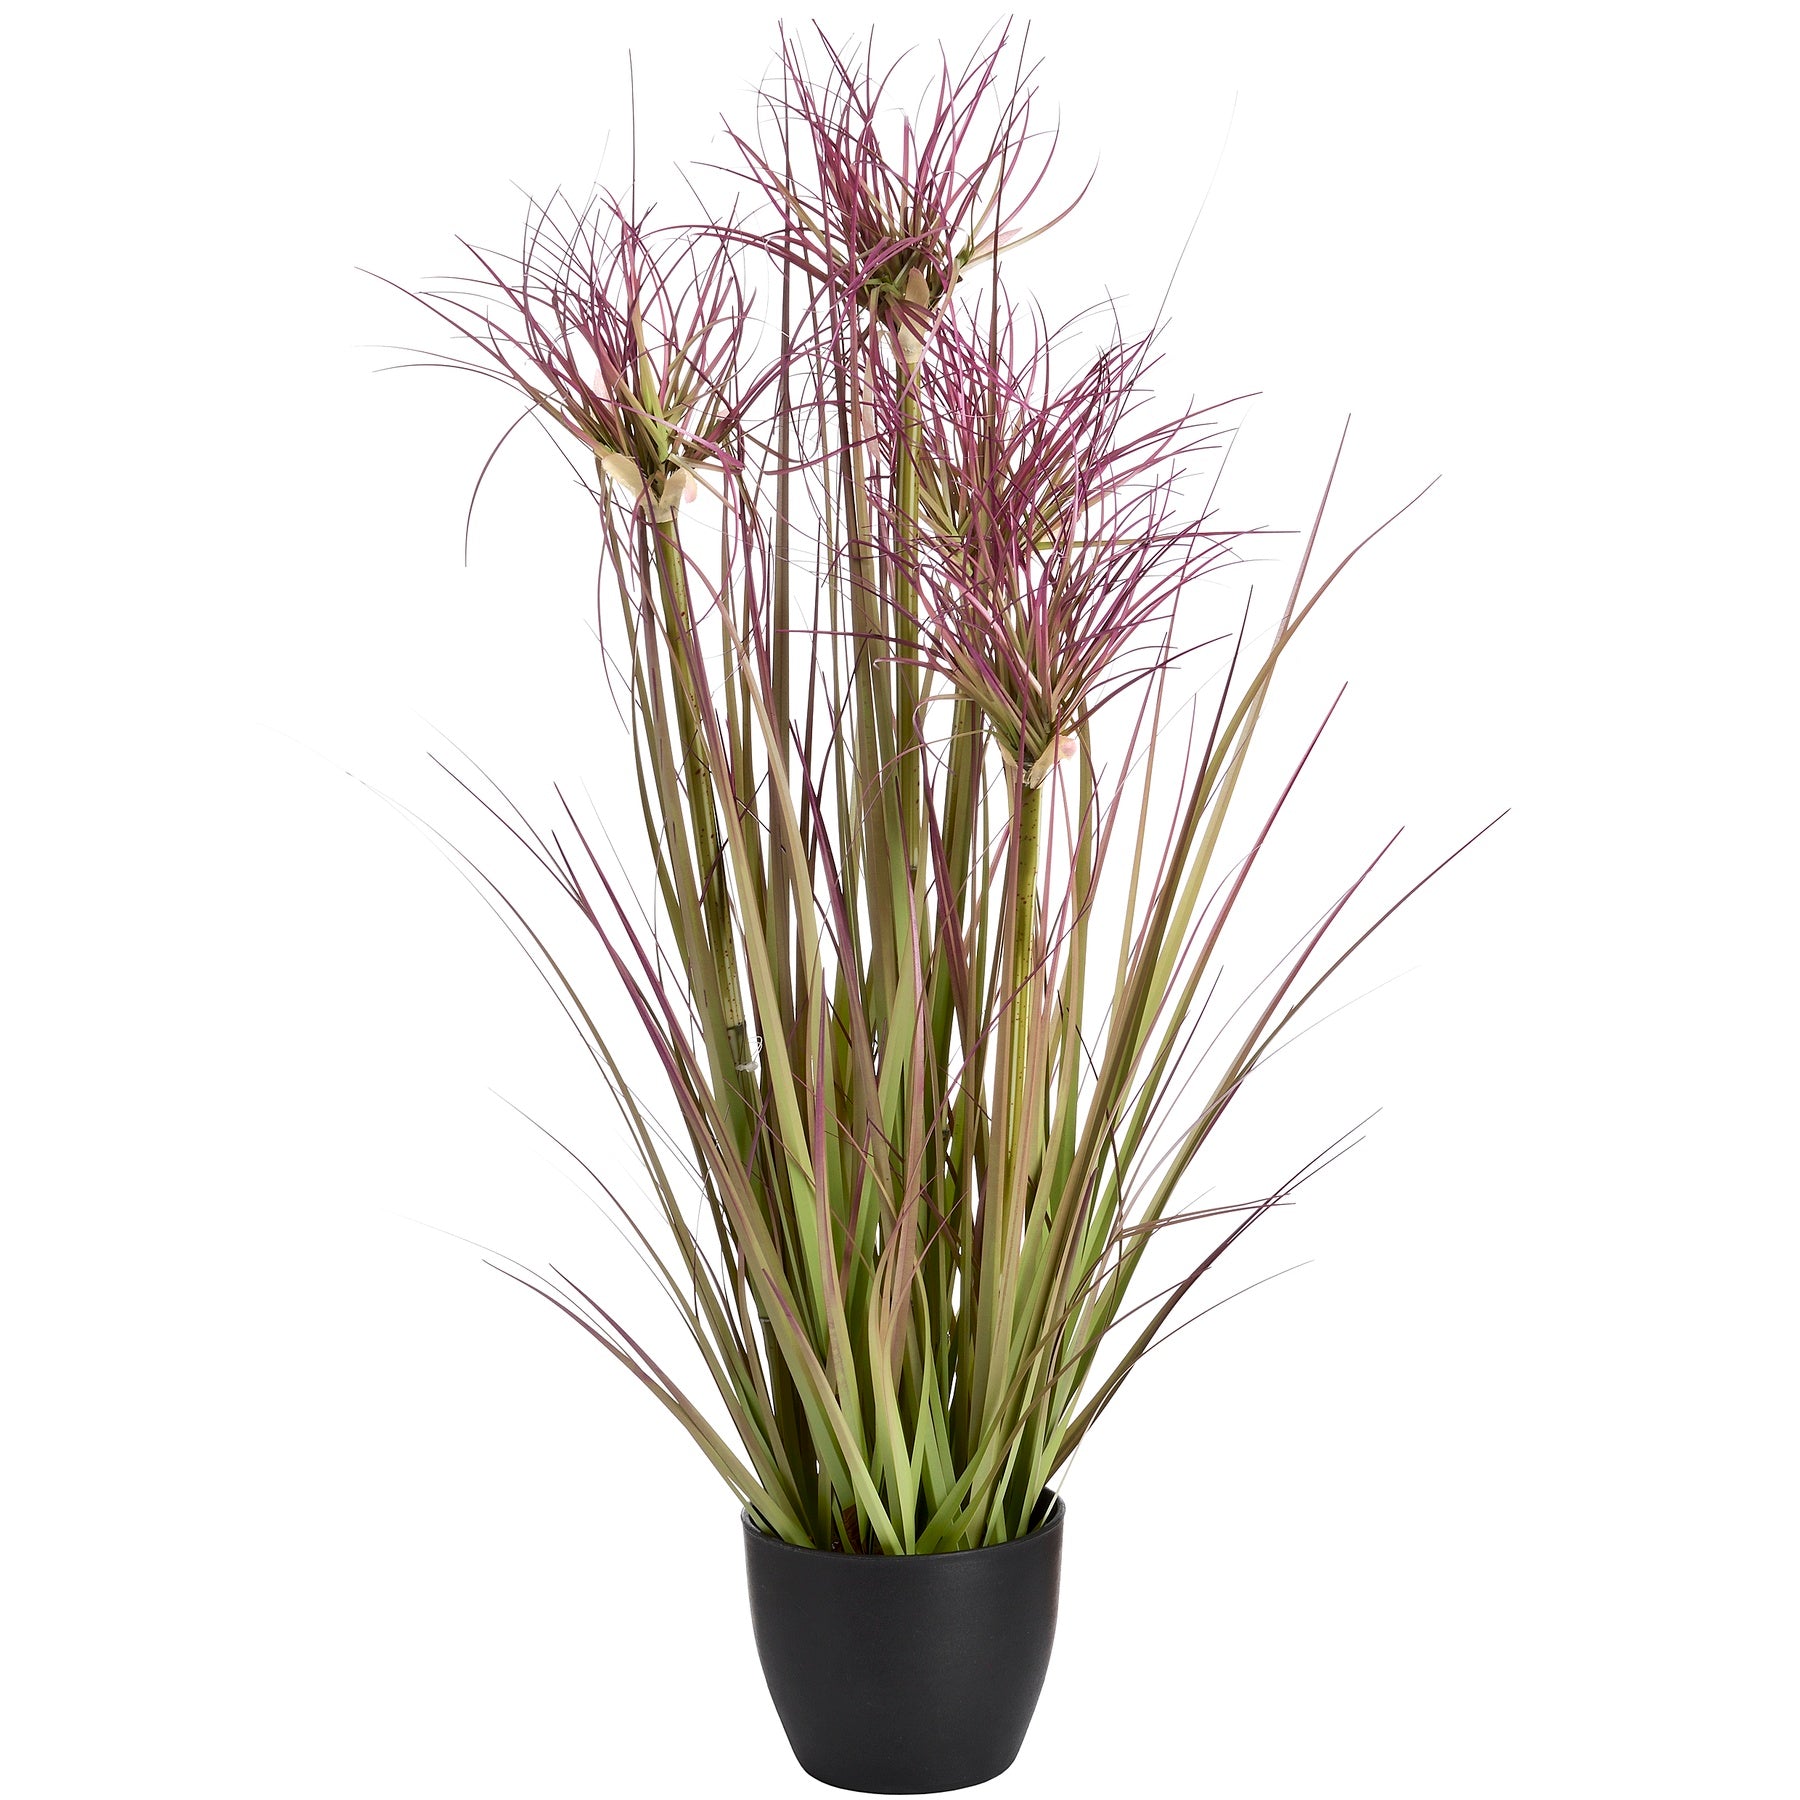 View Water Bamboo Grass 24 Inch information